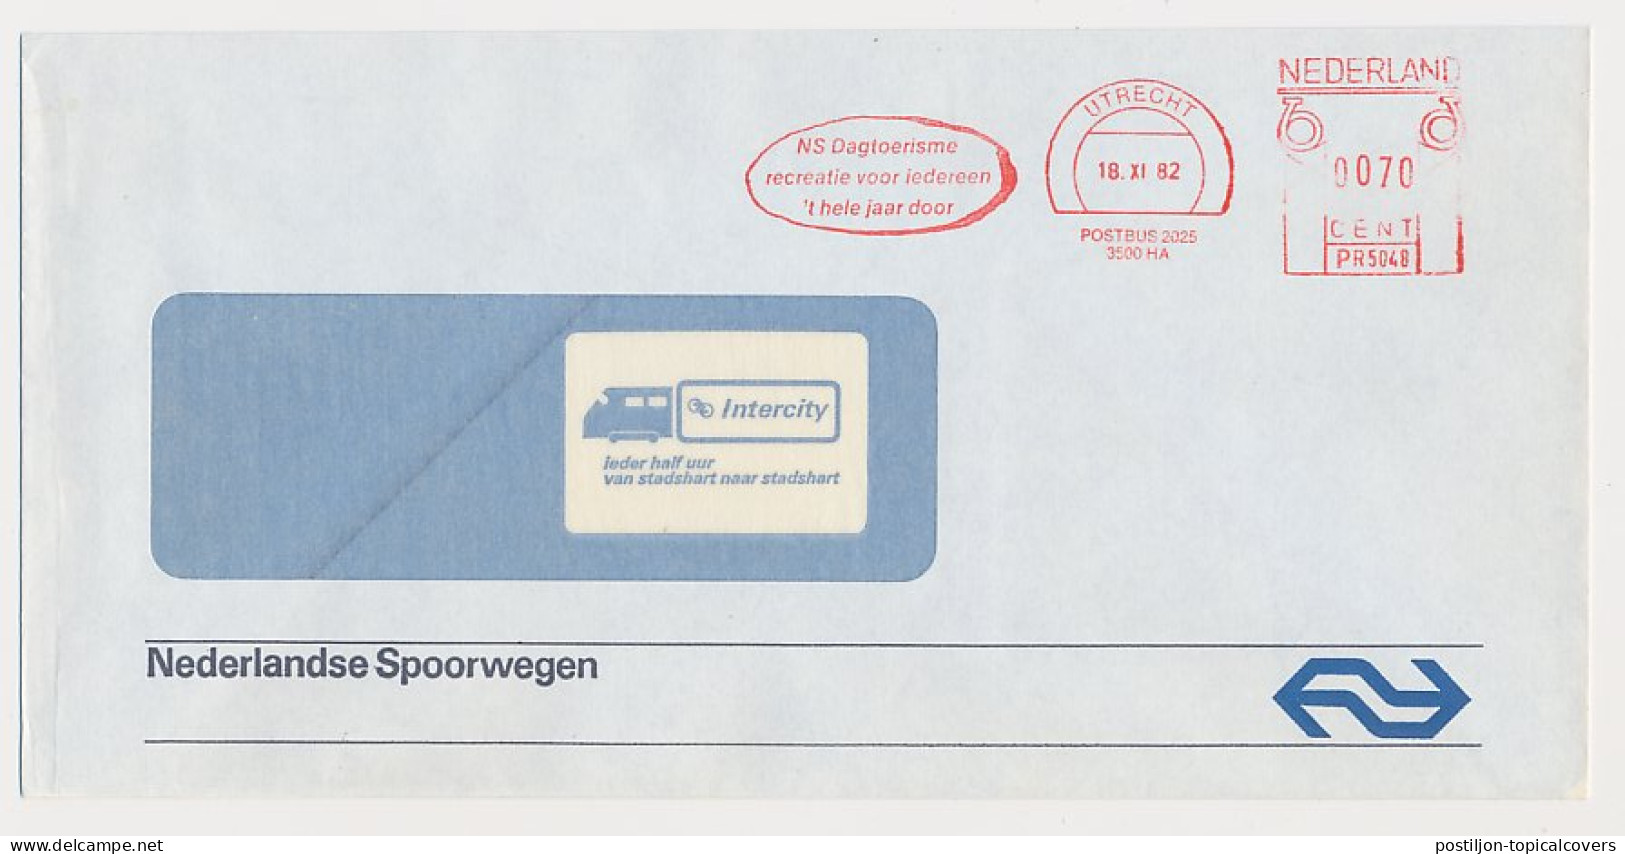 Illustrated Meter Cover Netherlands 1982 - Postalia 5048 NS - Dutch Railways - Day Tourism - Recreation For Everyone - Trains